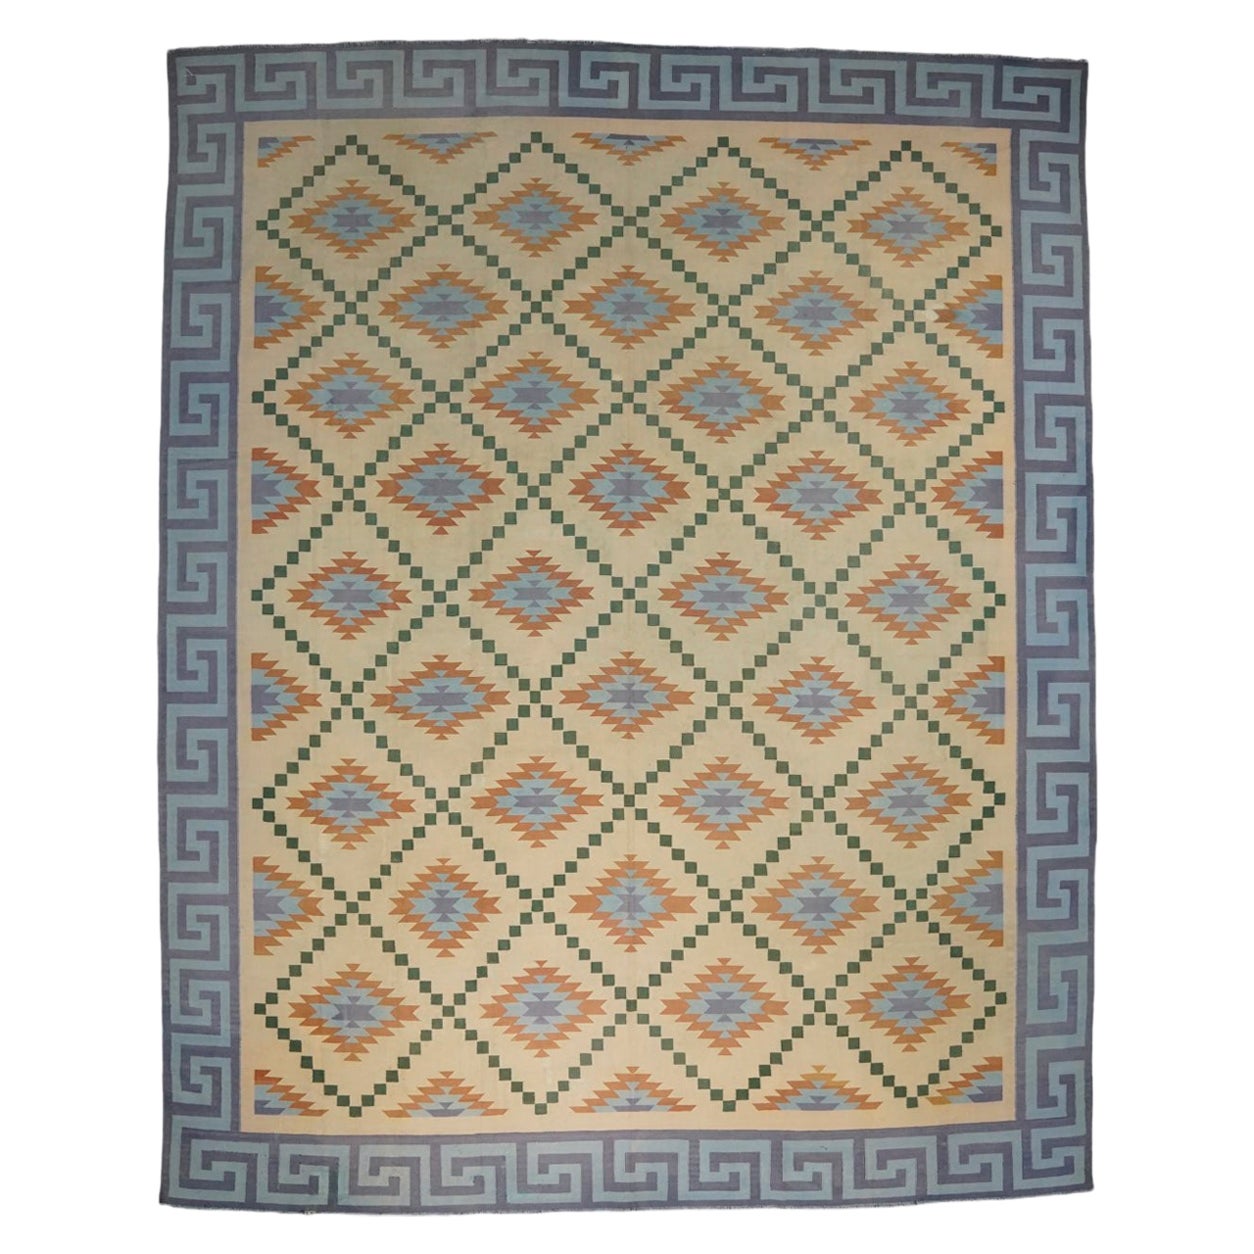 Vintage Dhurrie Rug in Cream with Blue Geometric Patterns, from Rug & Kilim   